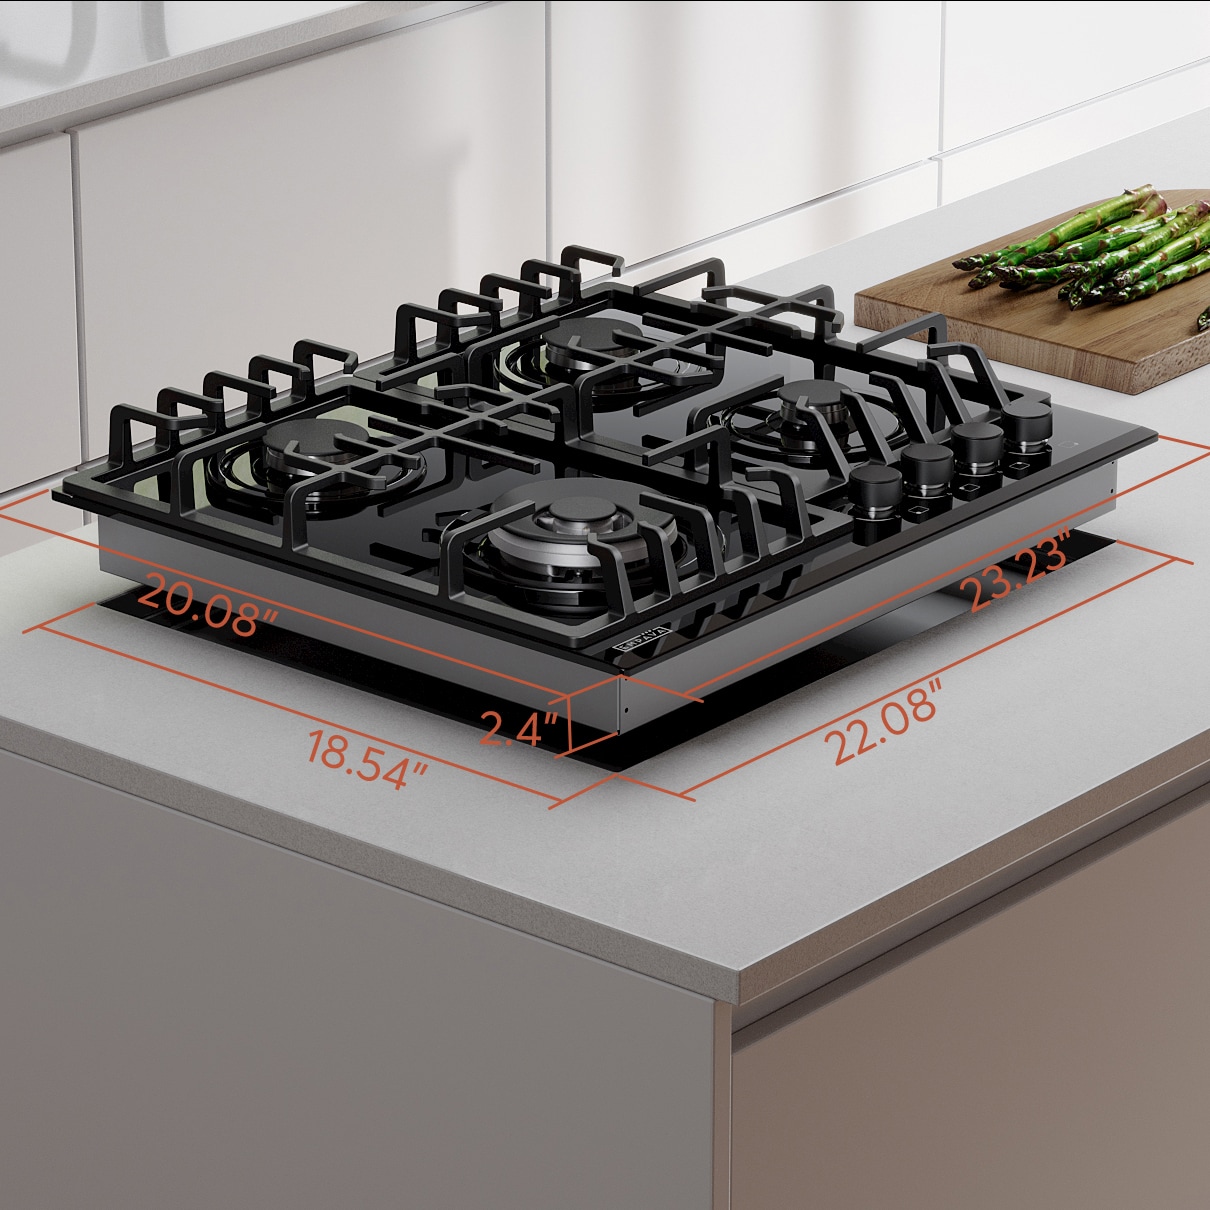 Empava Built-In 24 in. 240V Electric Stove Smooth Surface Cooktop in Black with 4 Elements, 24 inch